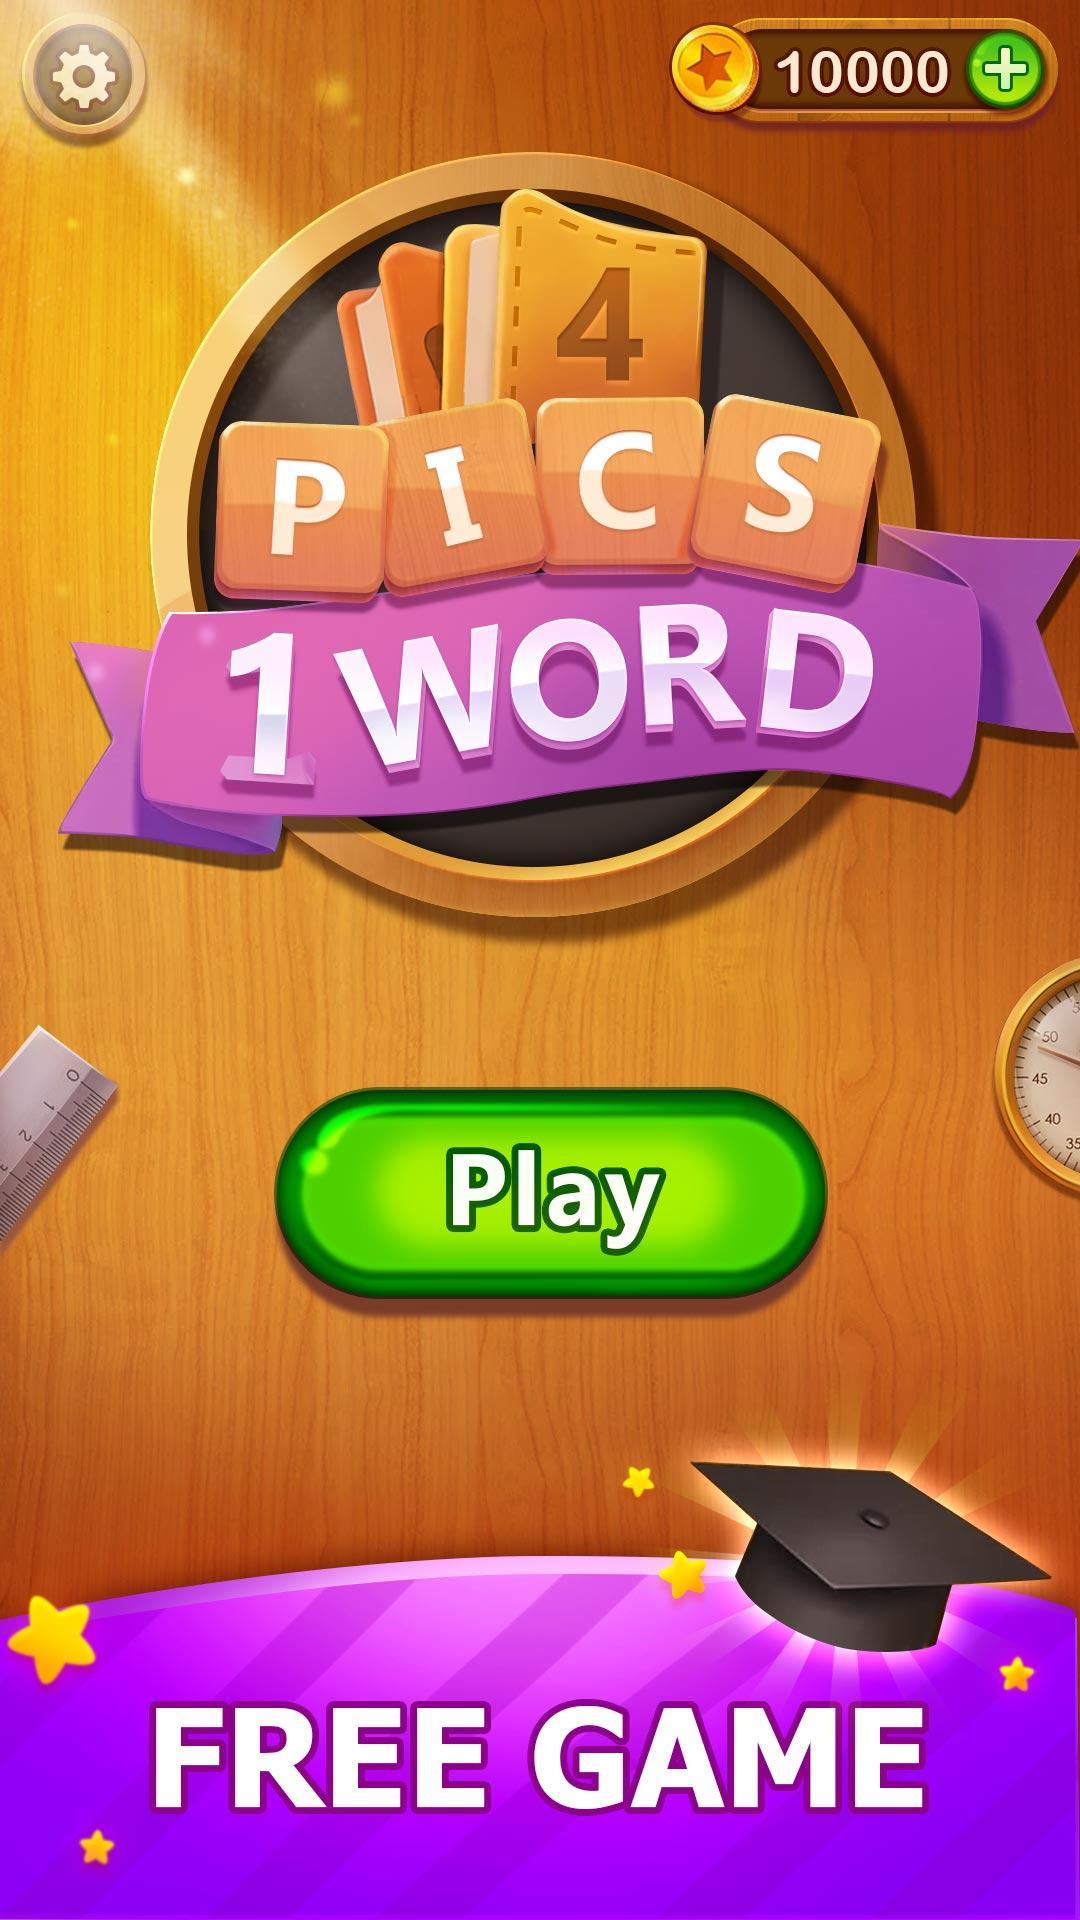 4 Pics Guess 1 Word - Word Games Puzzle screenshot game